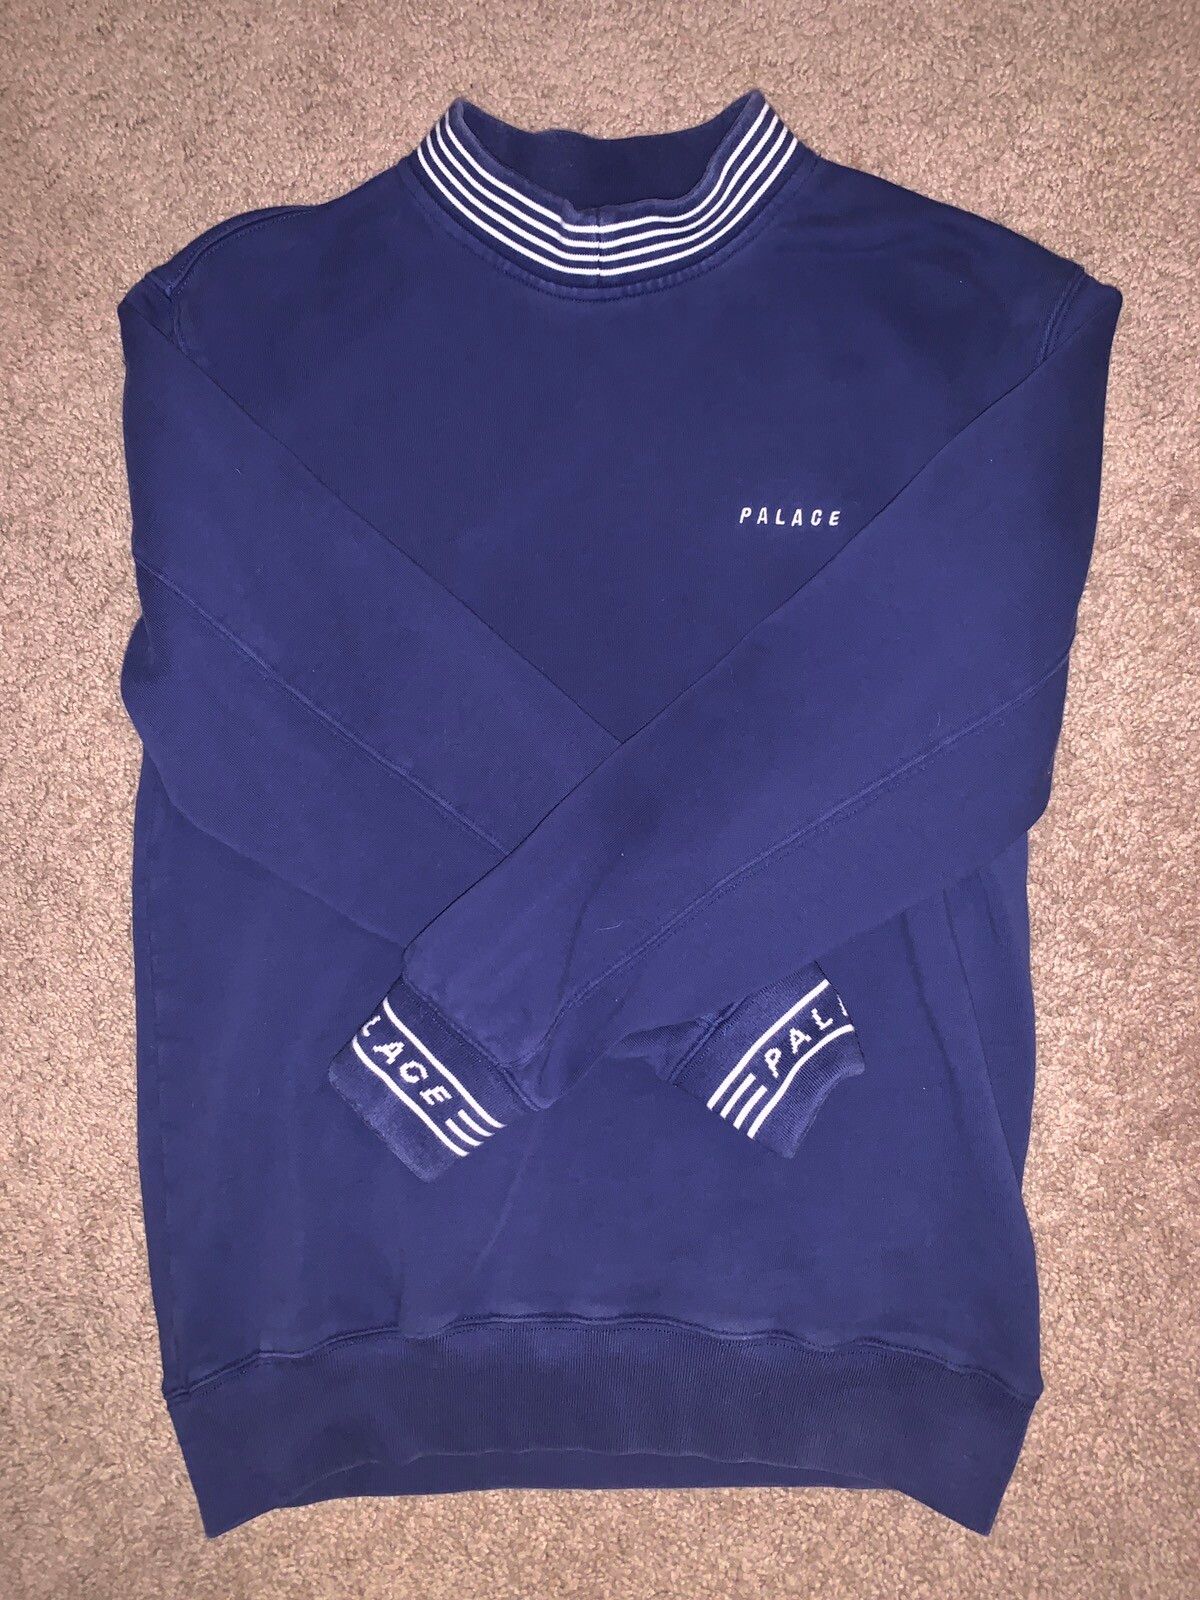 Palace Palace pullover sweater Size US S / EU 44-46 / 1 - 1 Preview